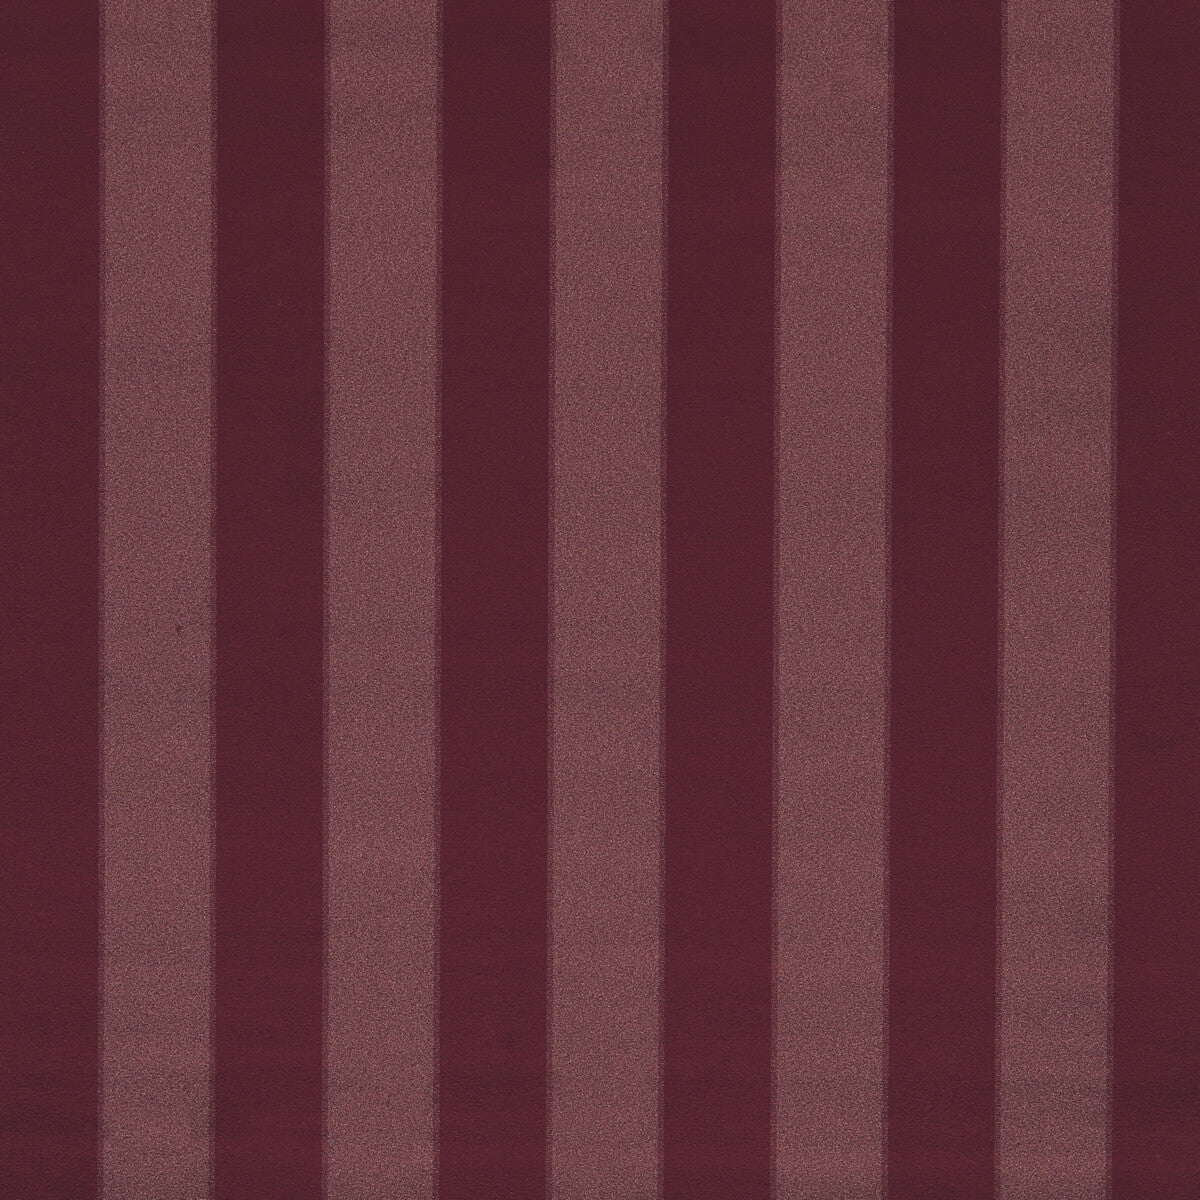 Haldon fabric in mulberry color - pattern F1690/06.CAC.0 - by Clarke And Clarke in the Whitworth collection